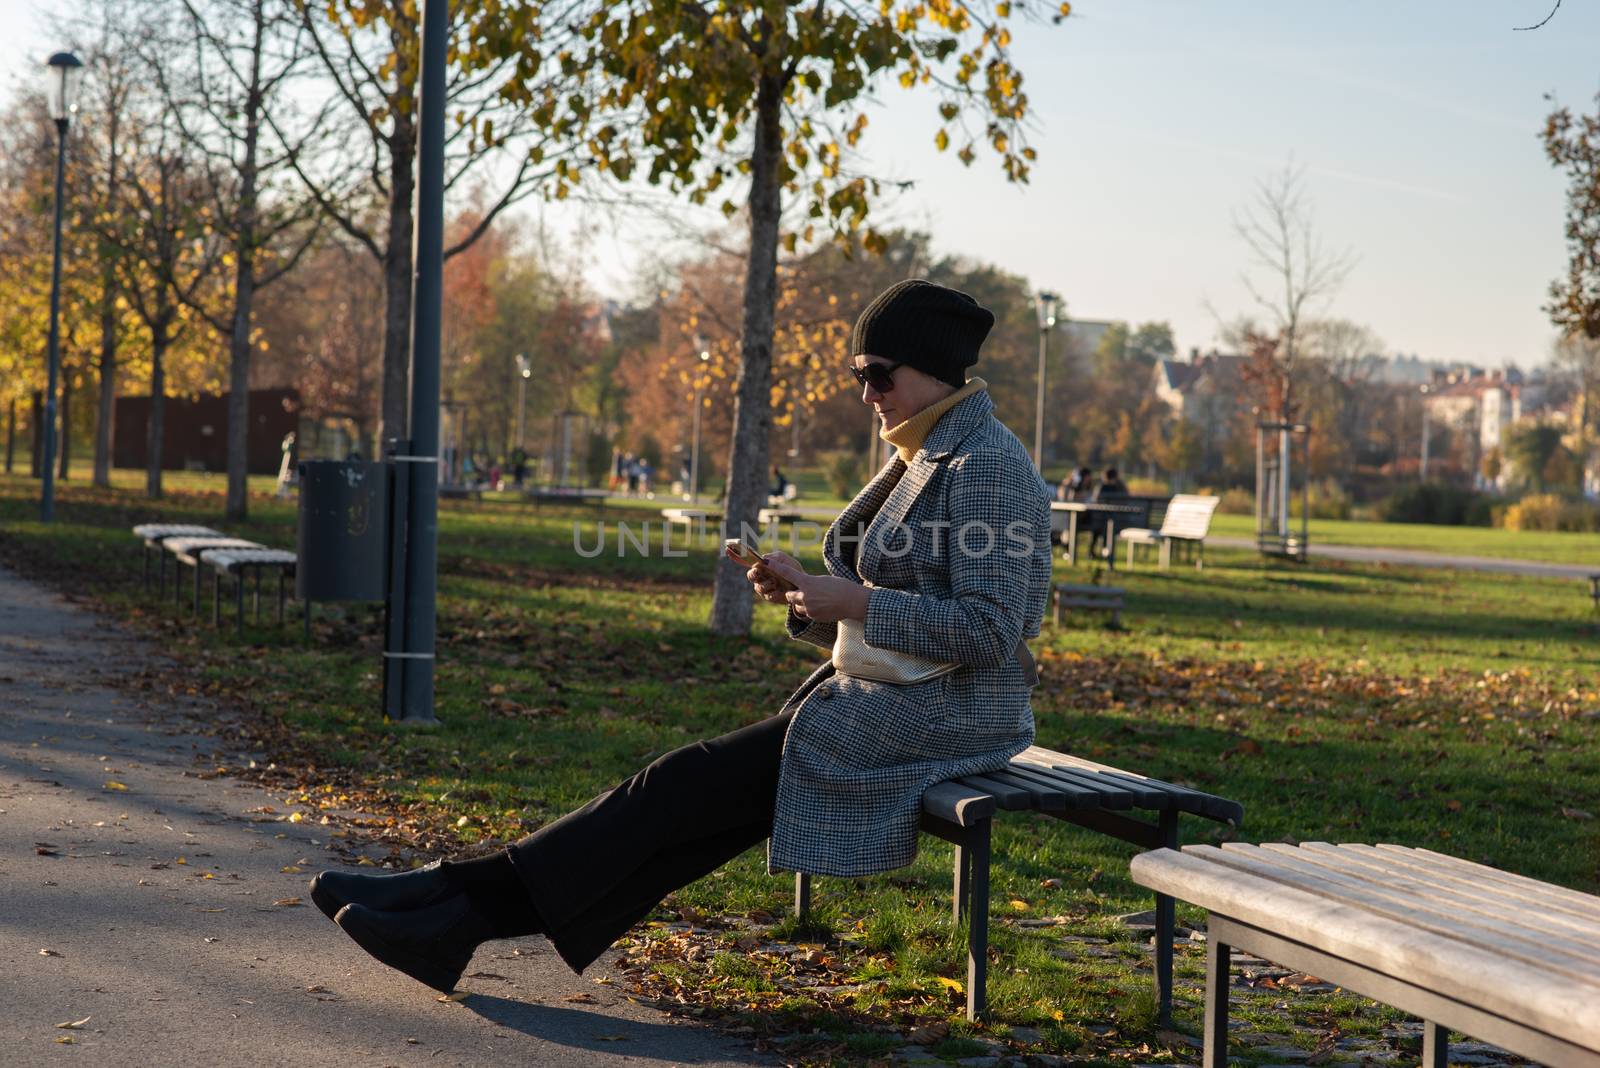 1/14/2020. Park Stromovka. Prague czech Republic. A woman is checking his phone in the park on a Sunday winter day. by gonzalobell